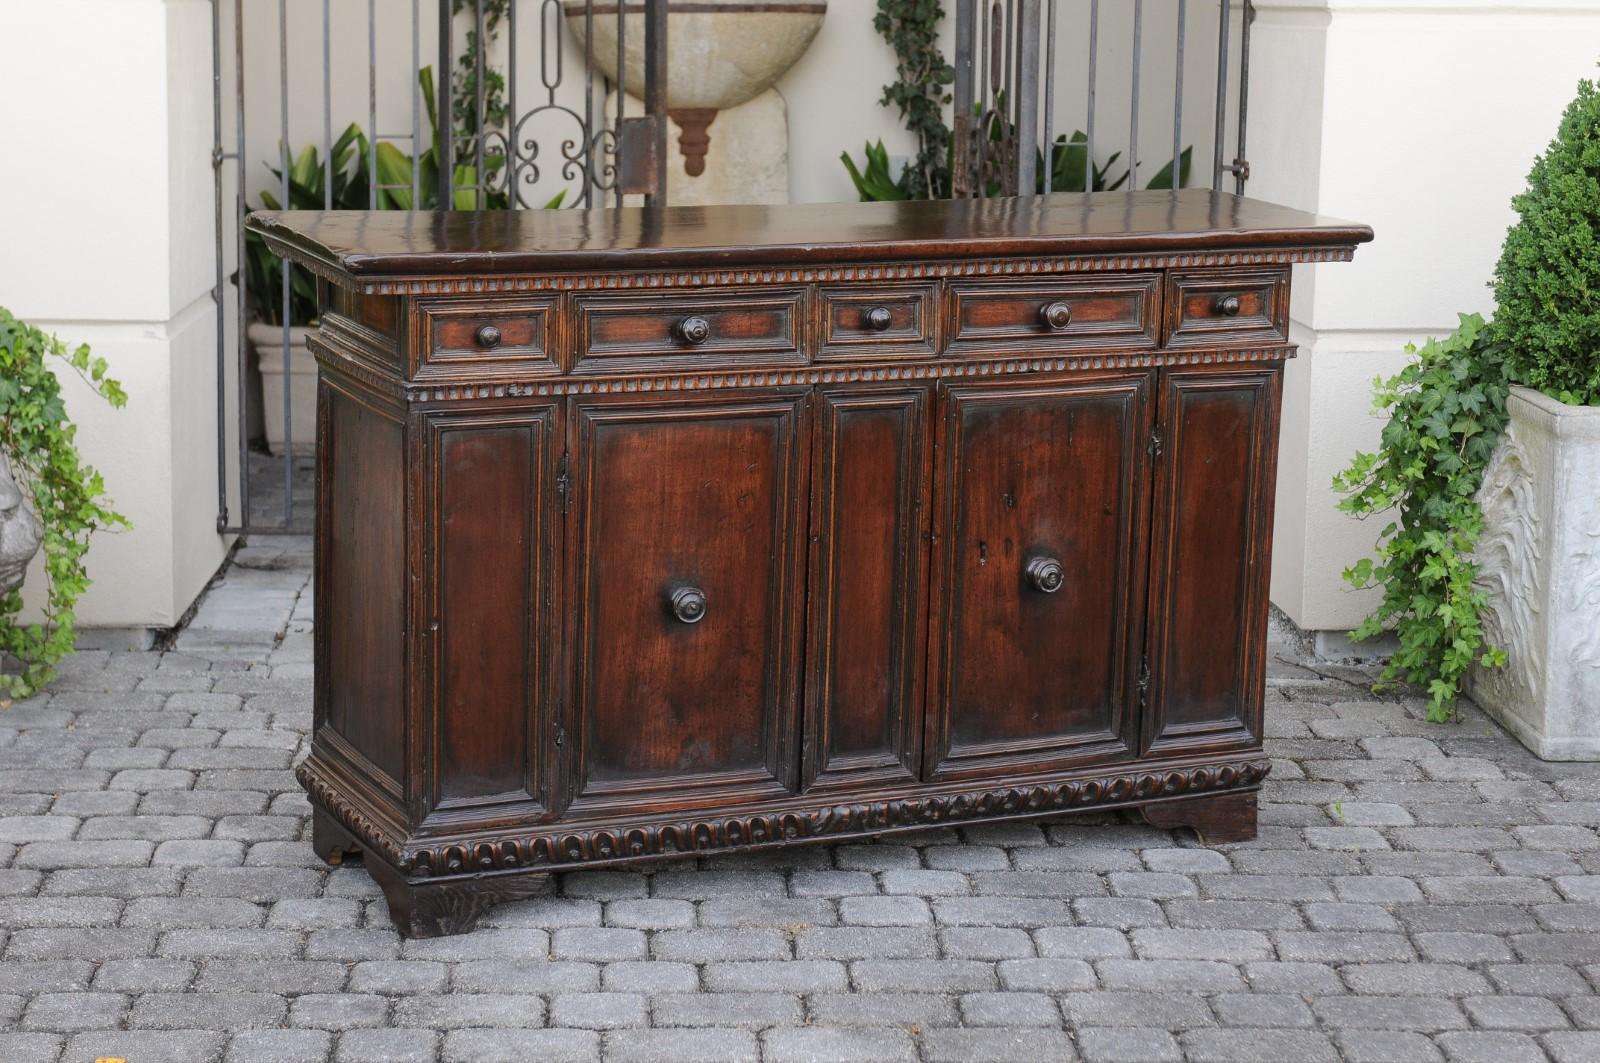 An Italian walnut credenza from the early 19th century, with five drawers, two doors and carved accents. Born in Italy during the early years of the 19th century, this exquisite walnut credenza features a rectangular top adorned with scooped